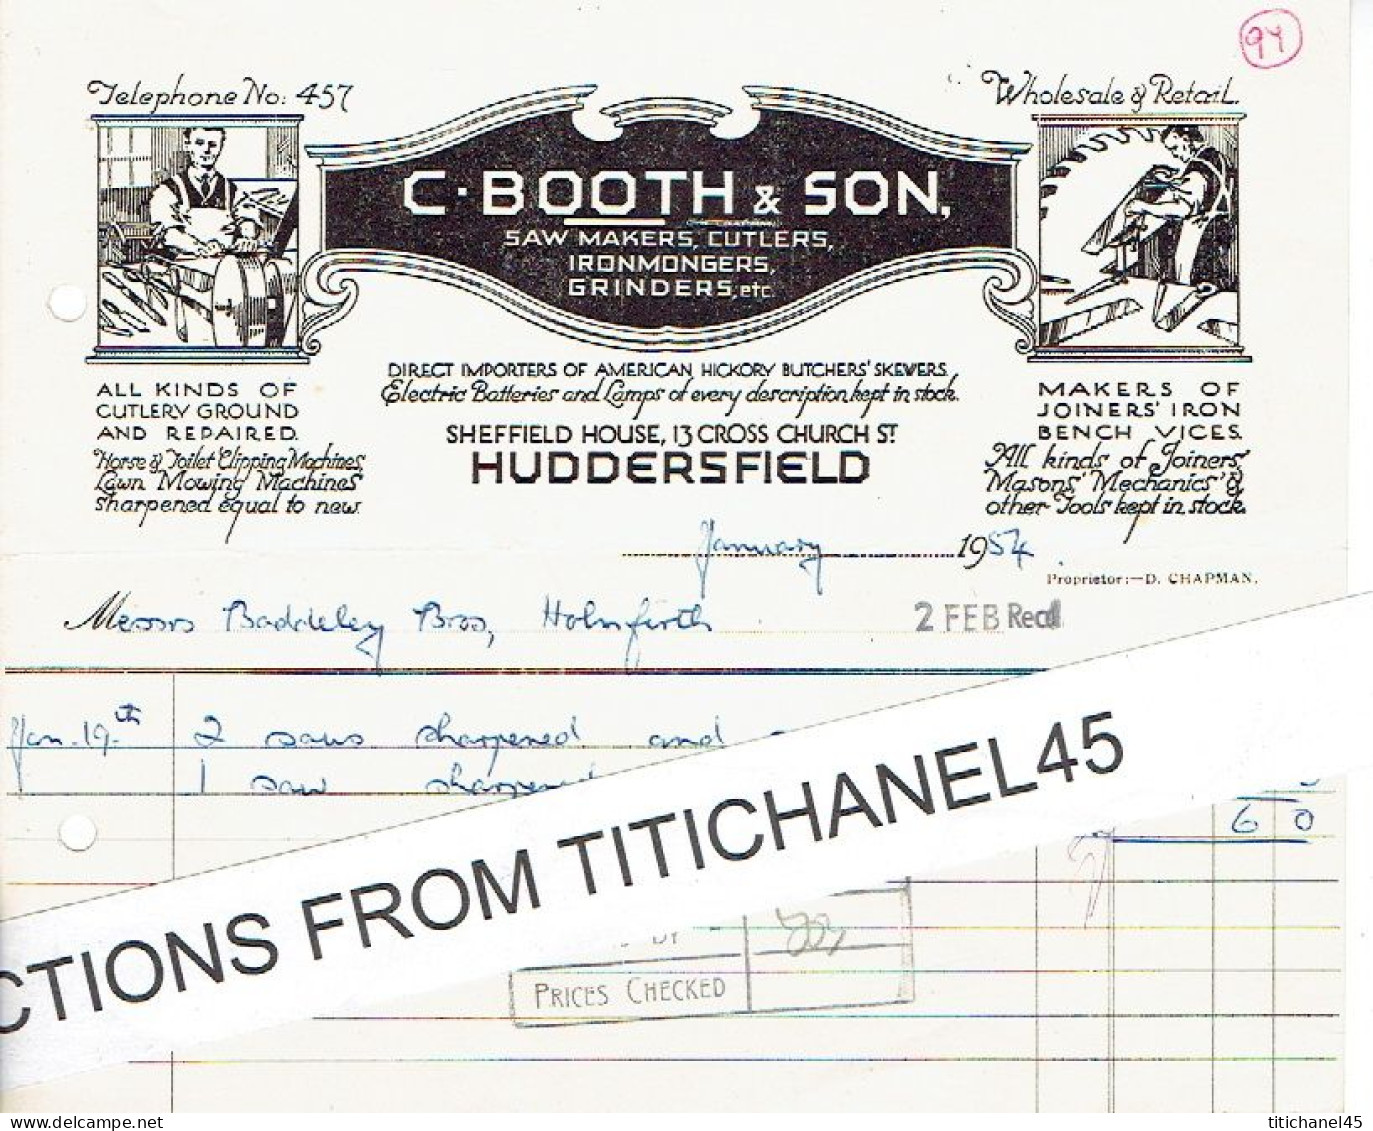 1954 HUDDERSFIELD - Invoice From C. BOOTH & SON - Saw Makers, Cutlers, Ironmongers, Grinders... - Royaume-Uni